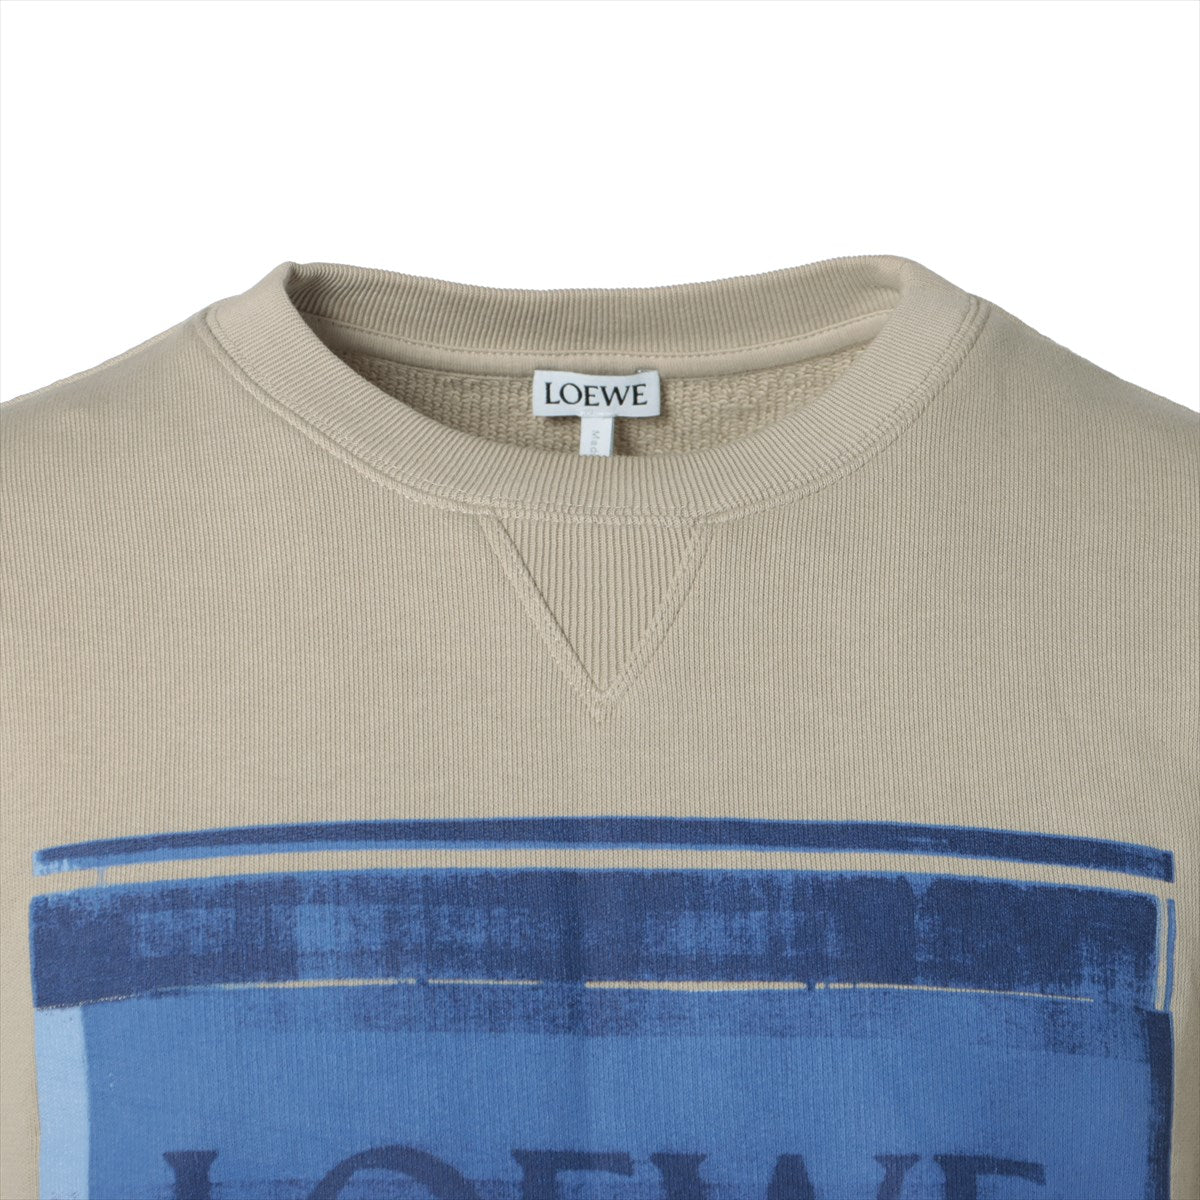 Loewe Anagram Cotton Basic knitted fabric M Men's Beige  H526Y24X11 photocopy